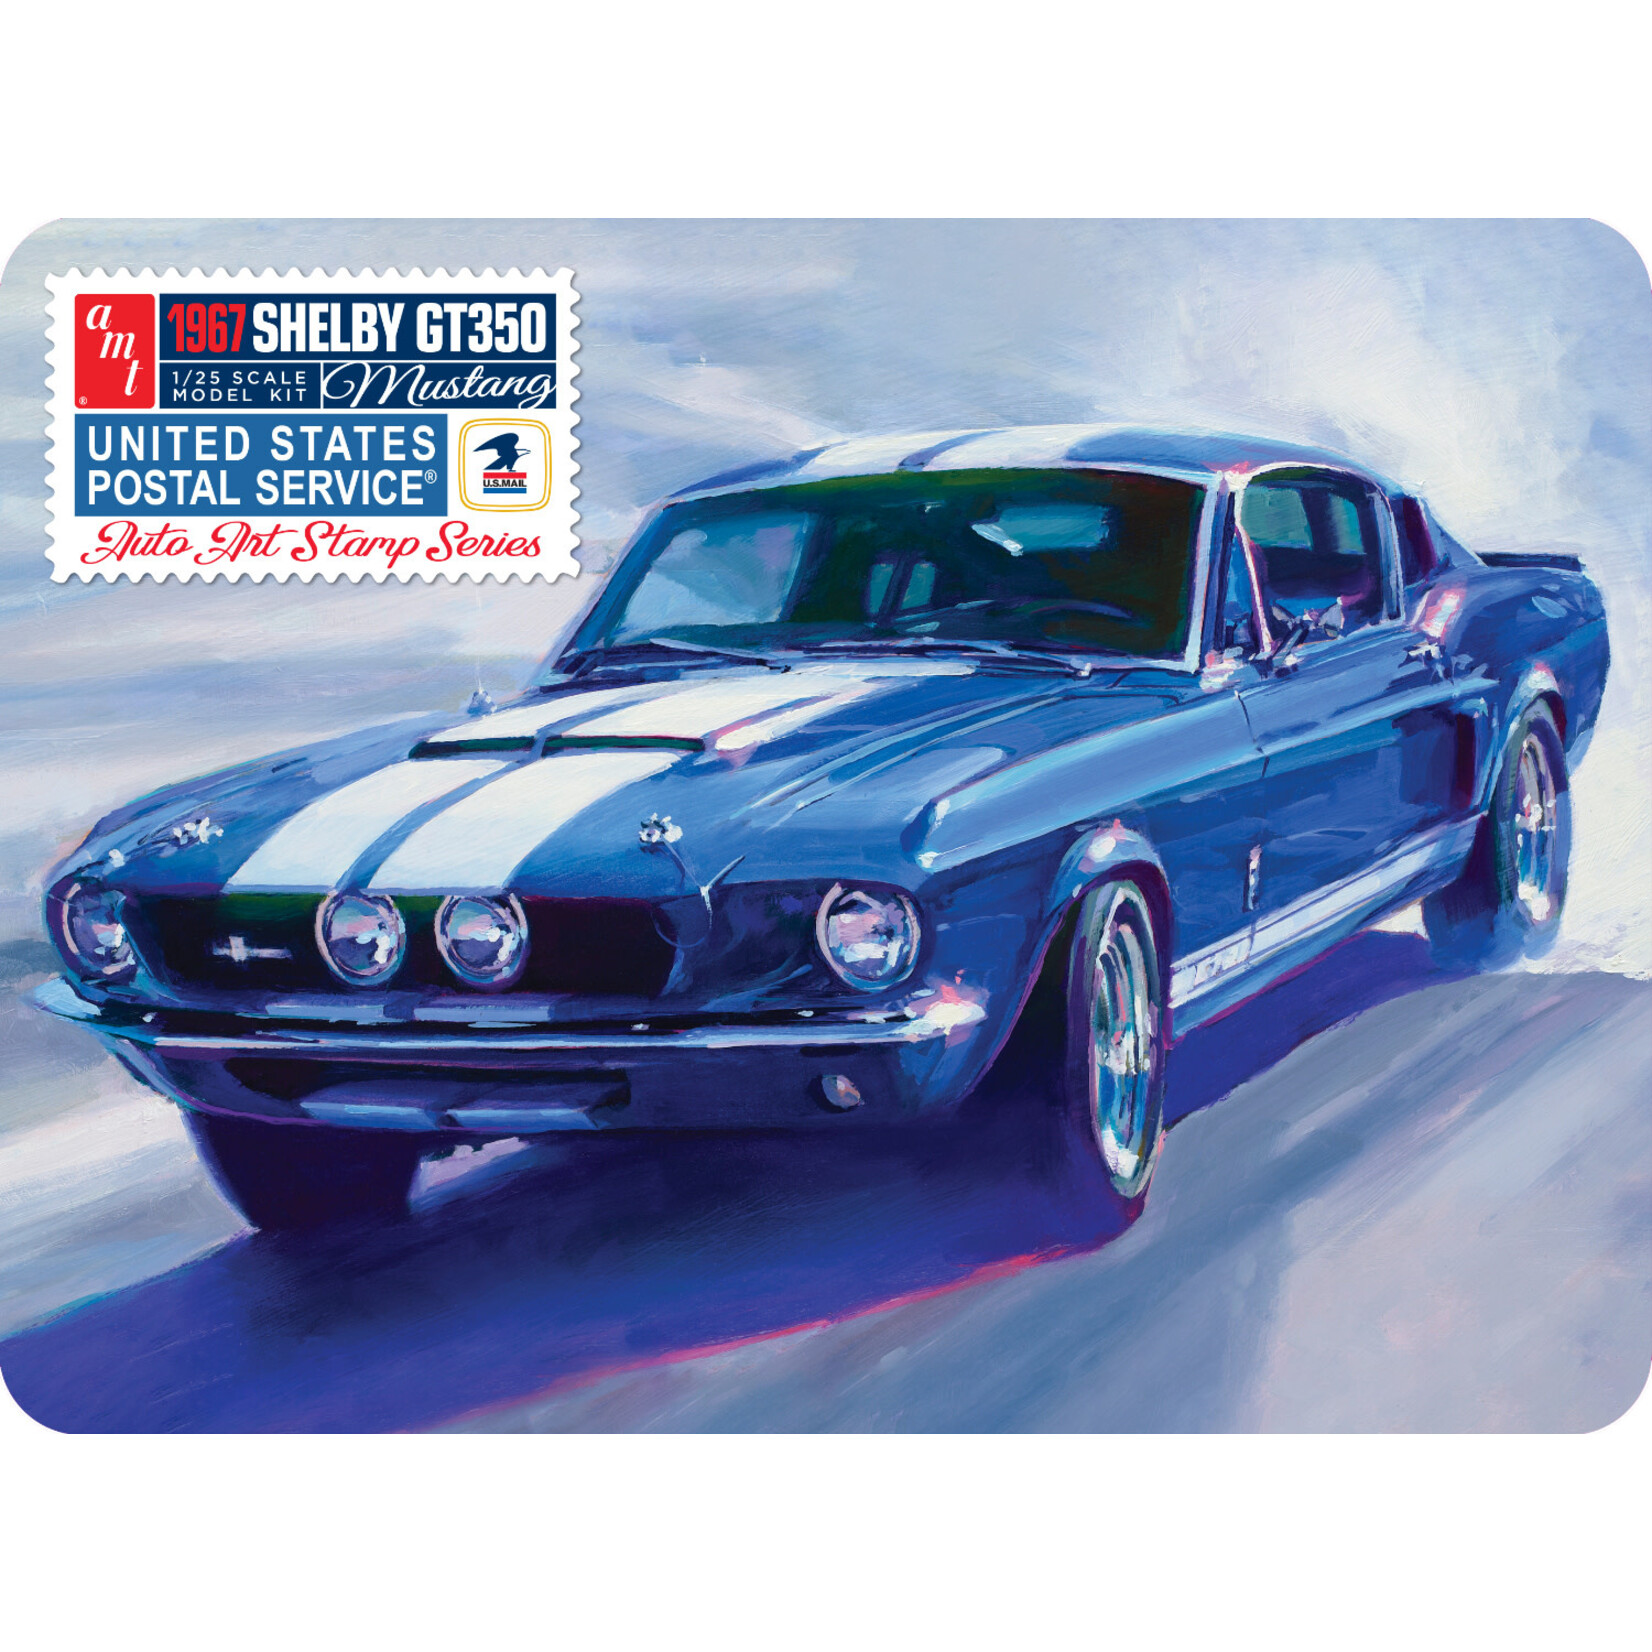 AMT AMT1356 1967 Shelby GT350 USPS Stamp Series (1/25)